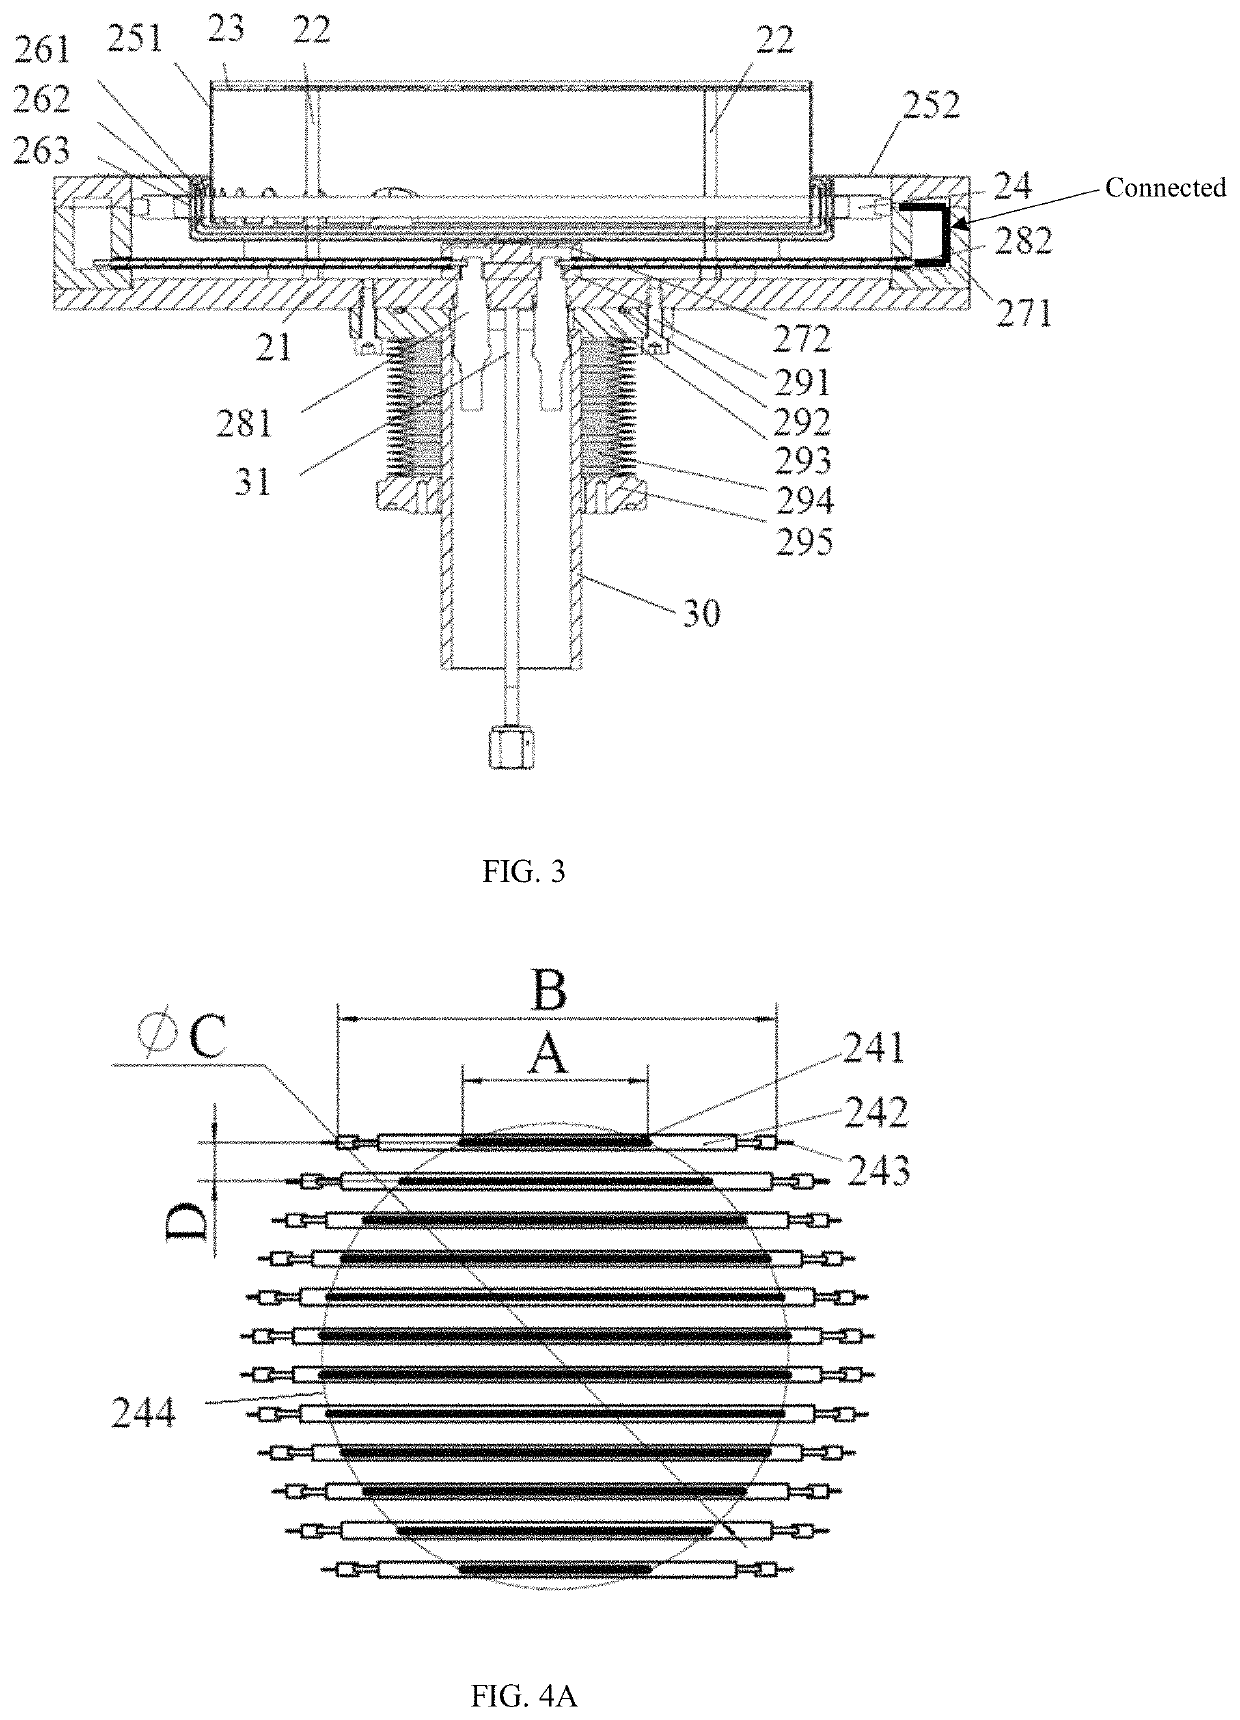 Heating device and heating chamber